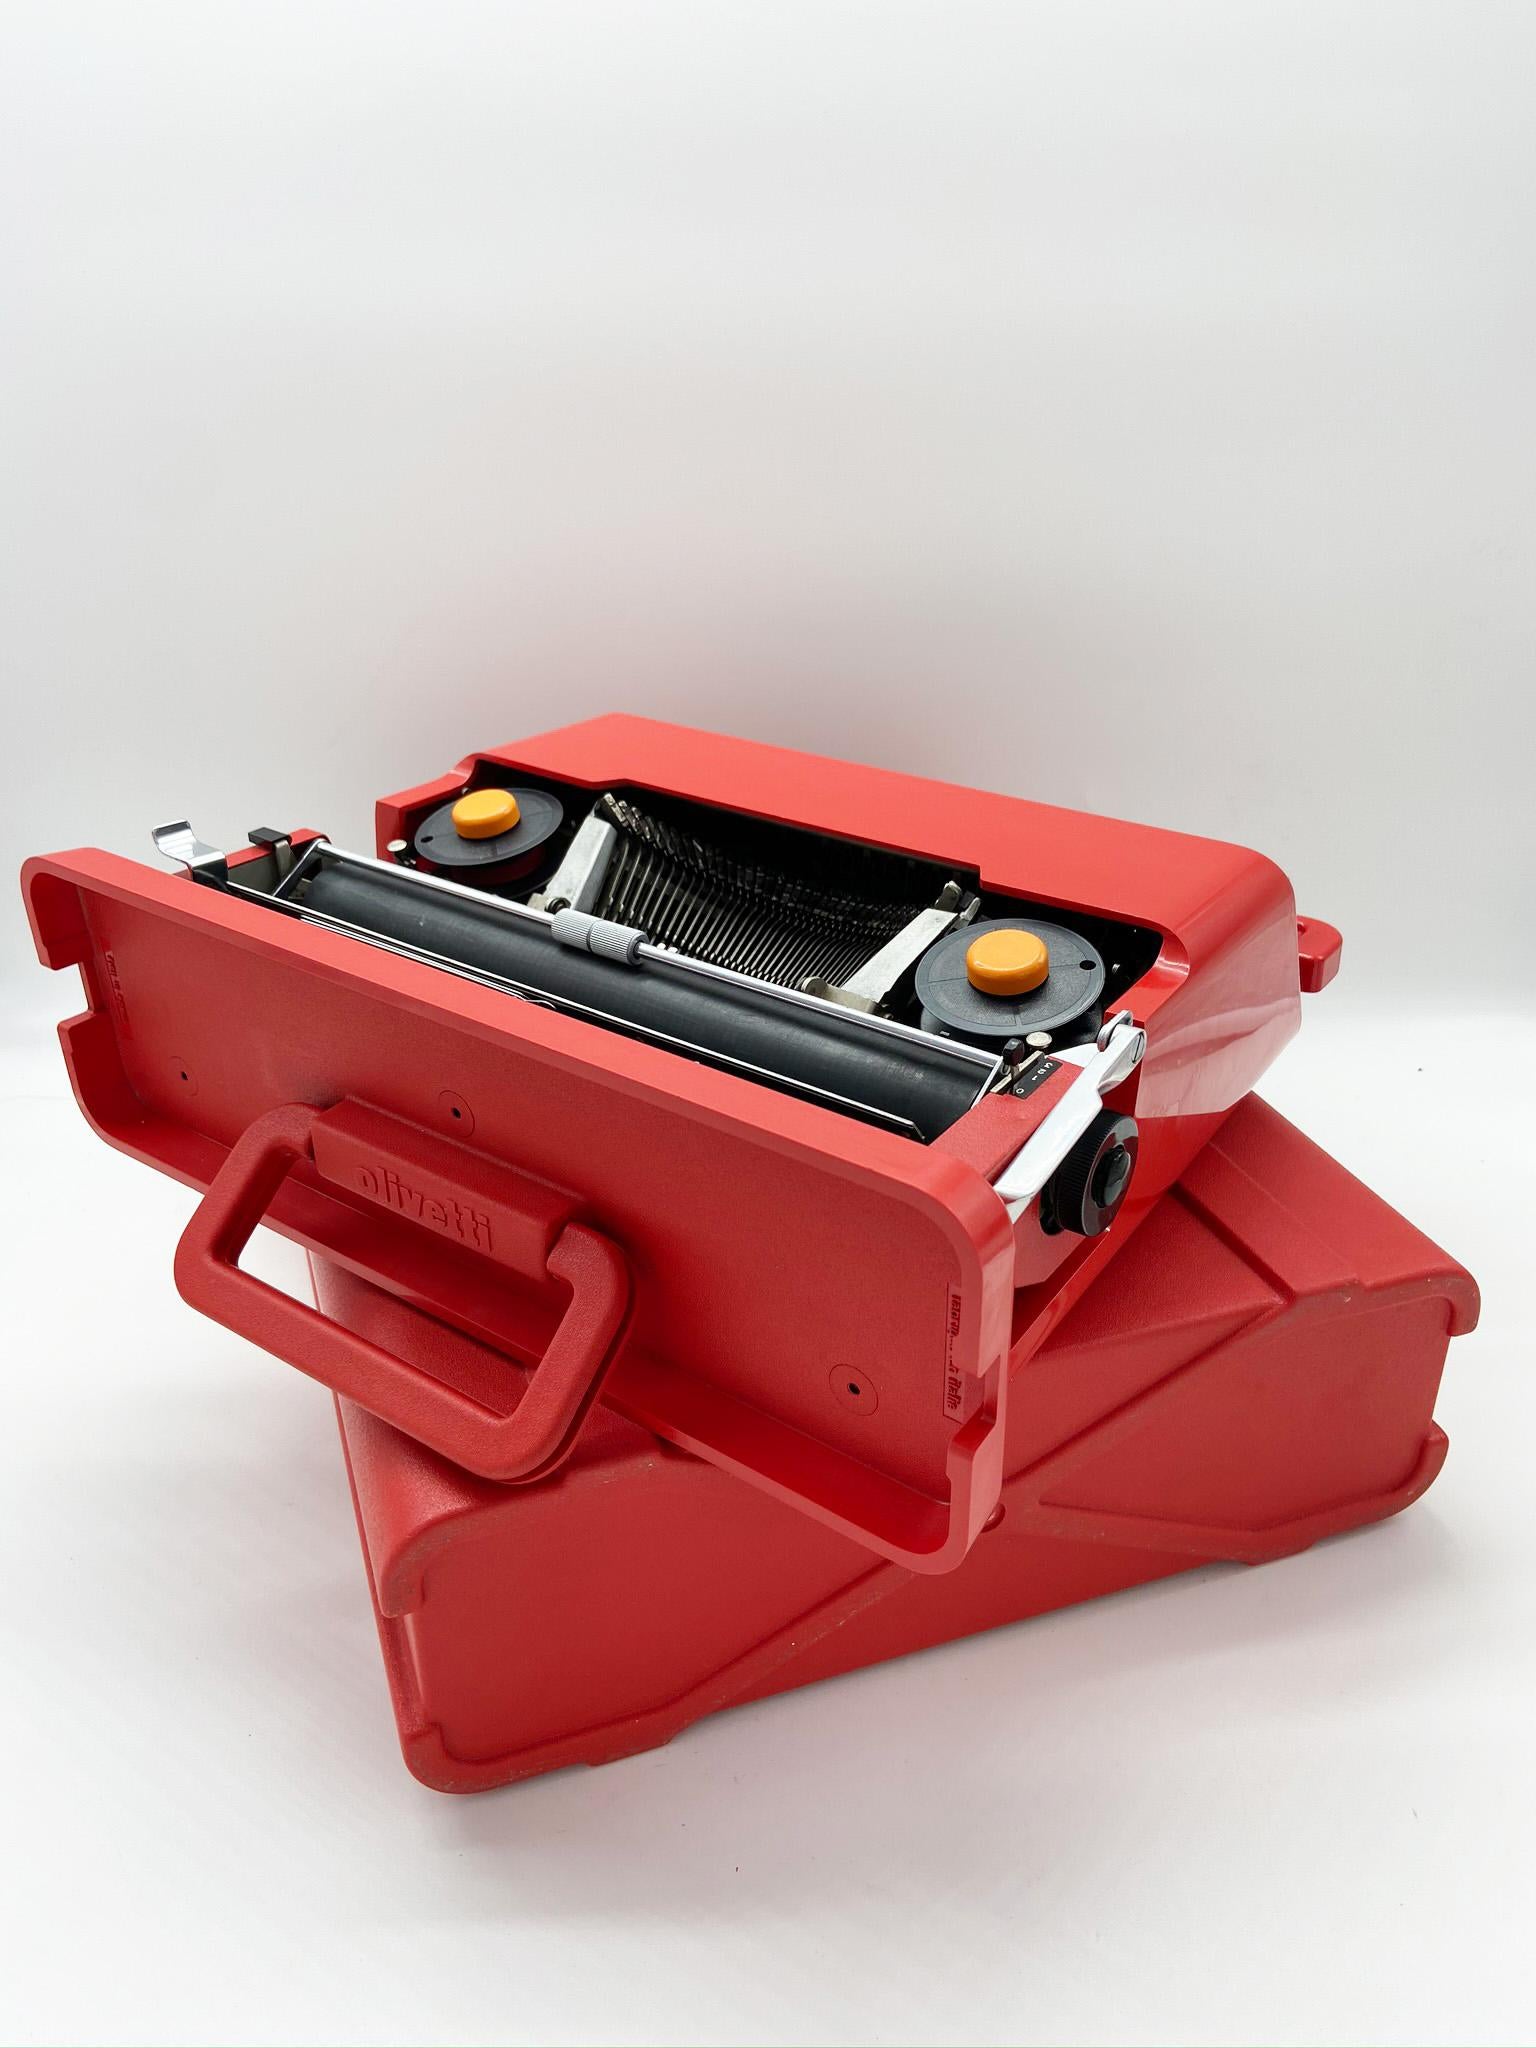 Olivetti Valentine is an Olivetti typewriter born in 1968 from the project of Ettore Sottsass and Perry A. King. The model was put into production the following year, in 1969. In 1970 Sottsass won the Compasso d'oro award.
In Italy it is known